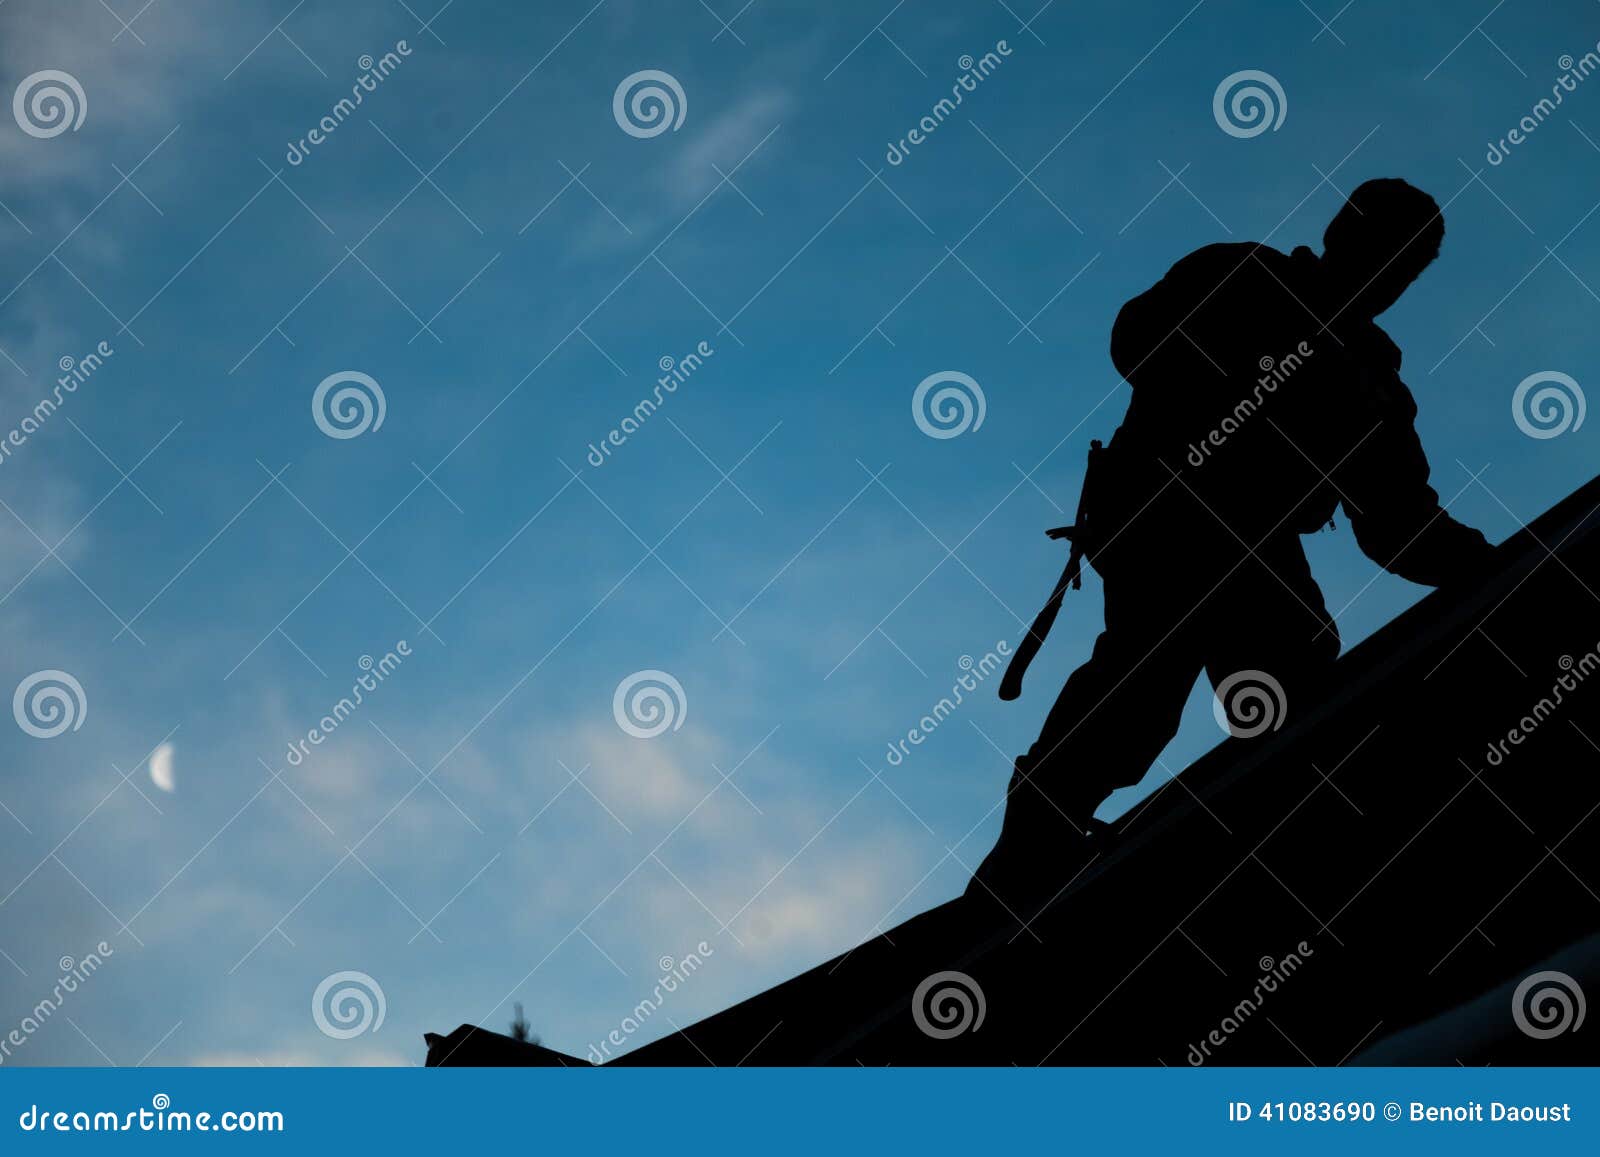 contractor in silhouette working on a roof top